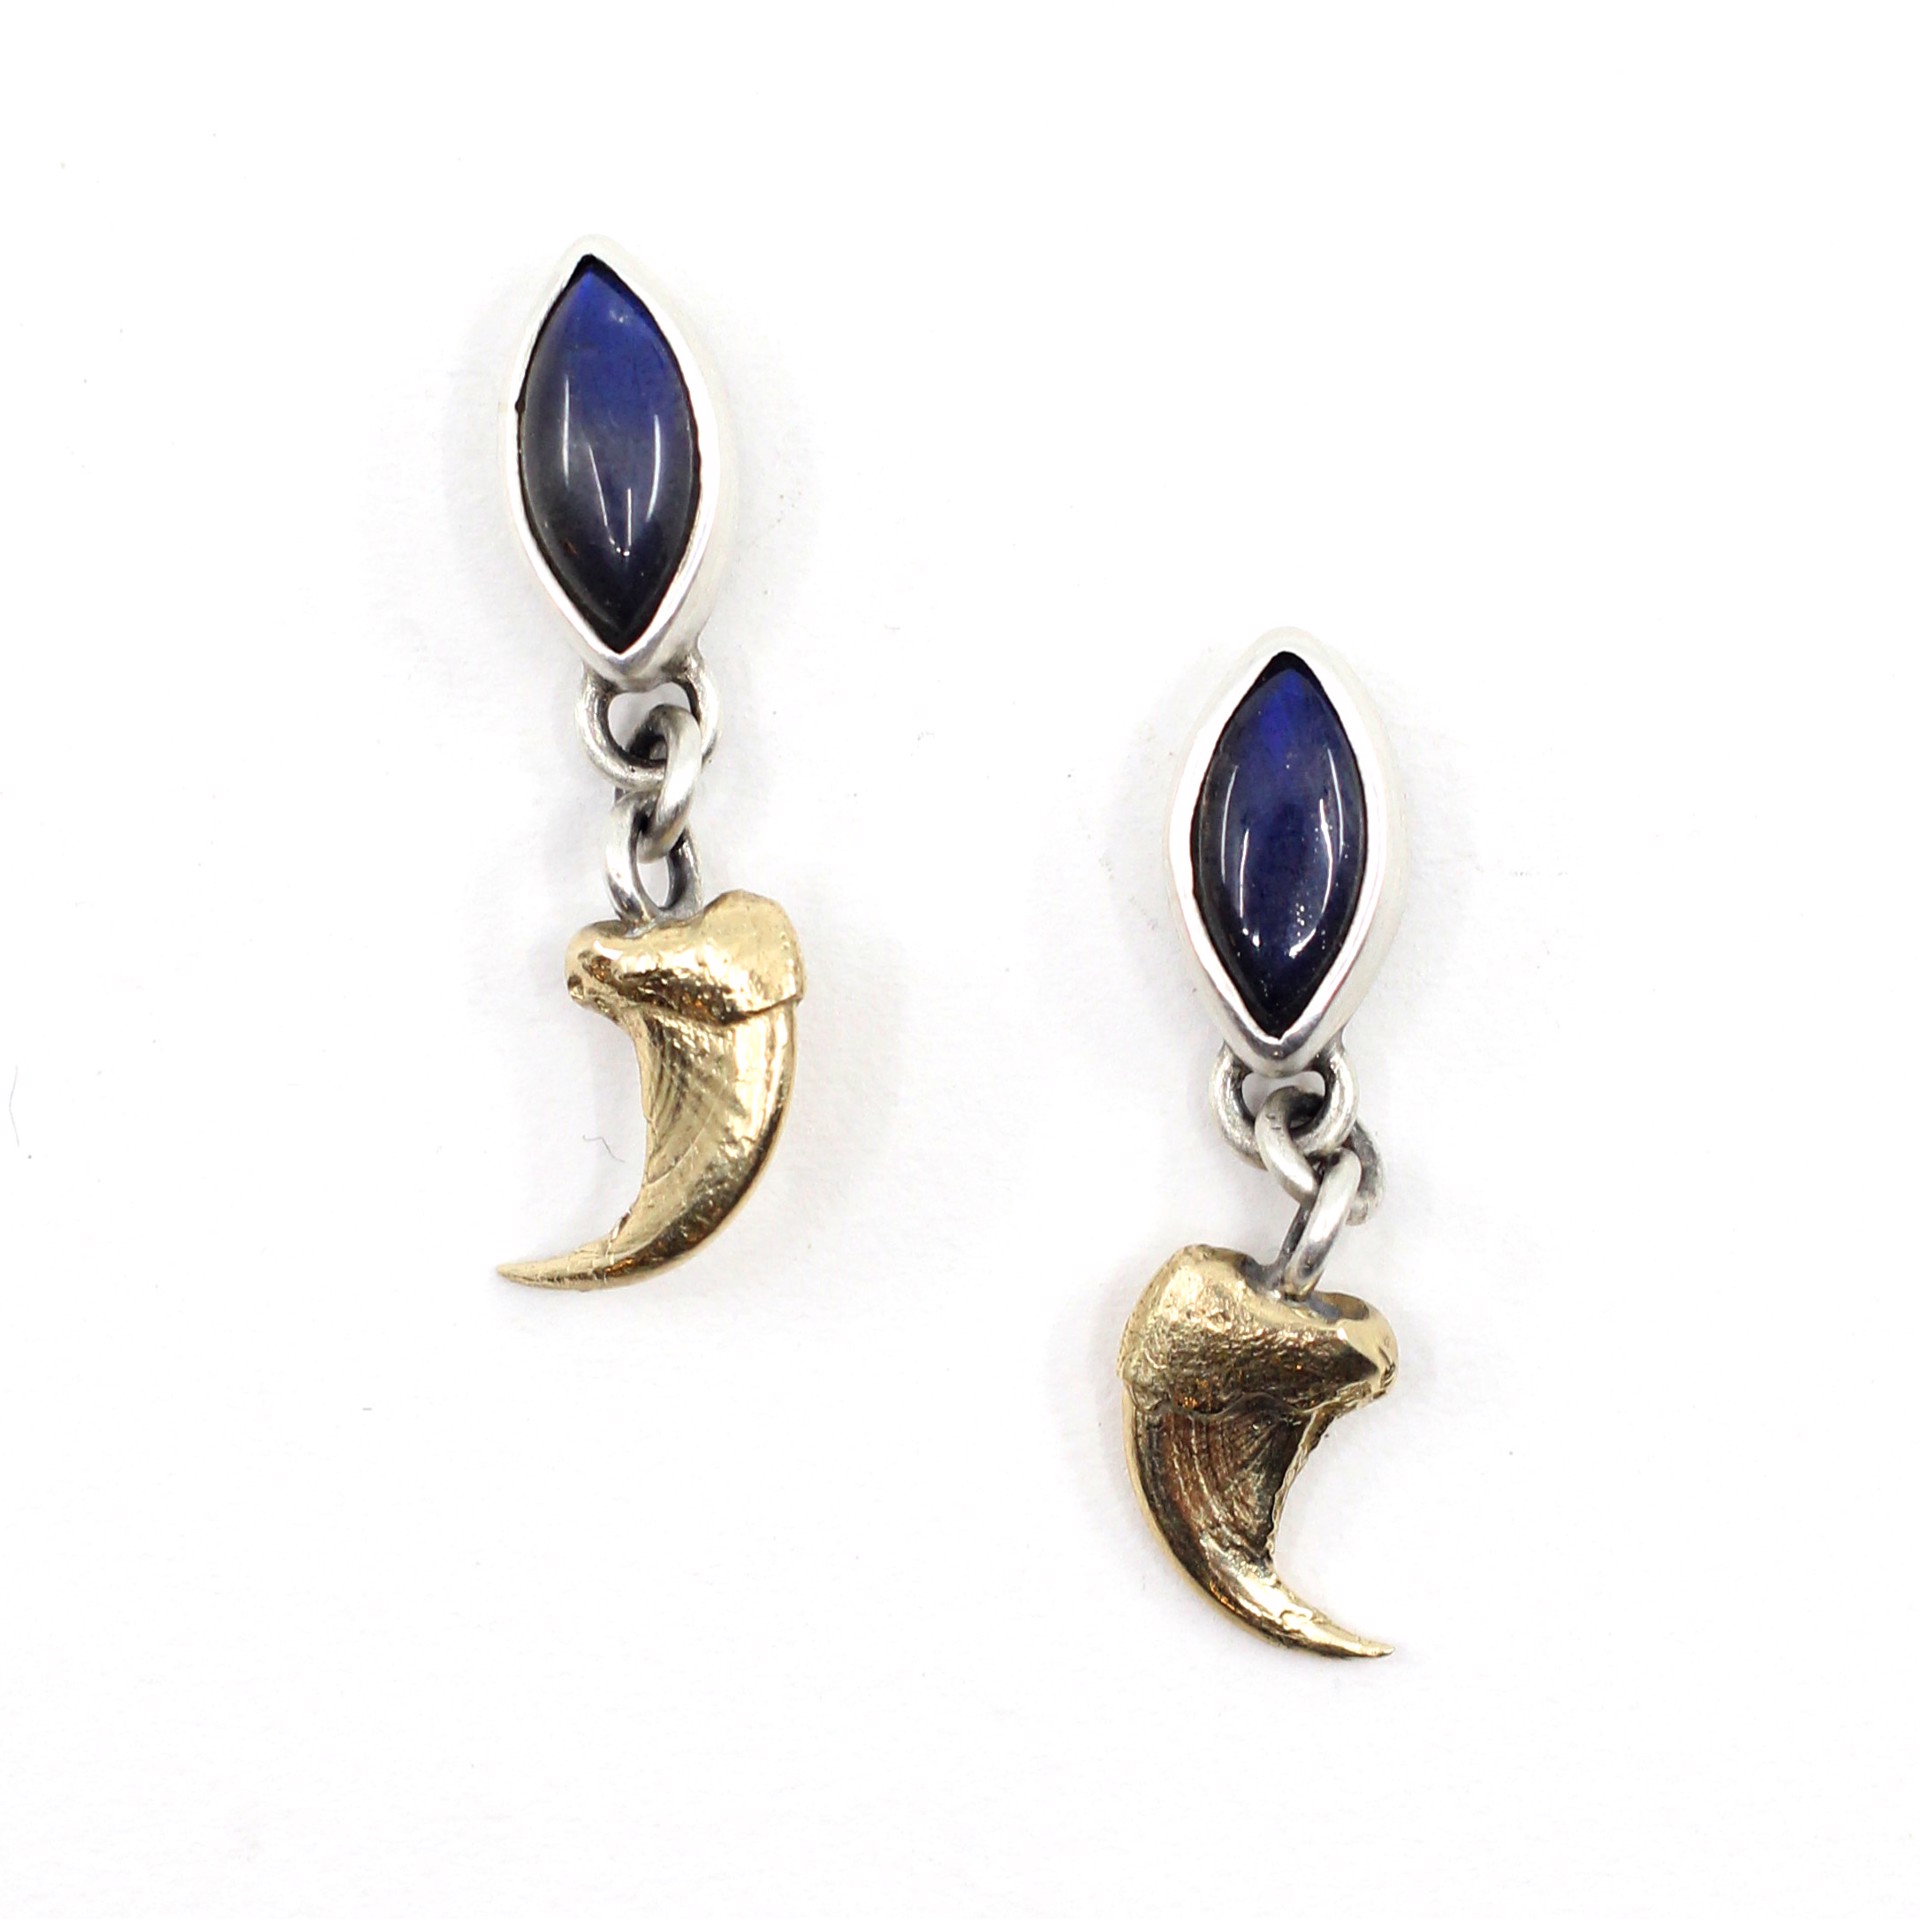 Labradorite Cat Claw Earrings by Silicate & Silver